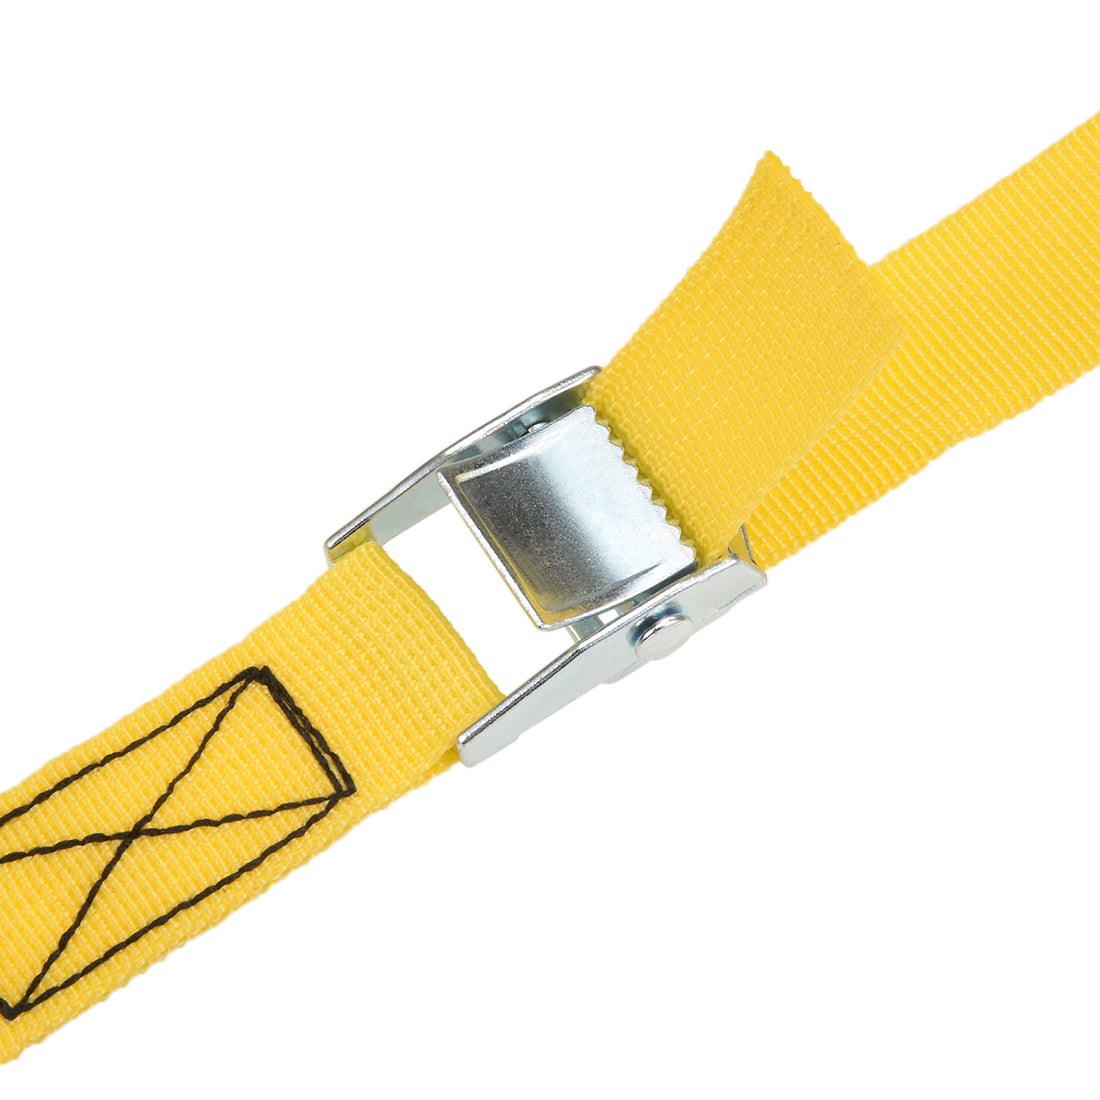 uxcell Uxcell 3Meters x 25mm Lashing Strap Cargo Tie Down Straps w Cam Lock Buckle 250Kg Work Load, Yellow, 4Pcs